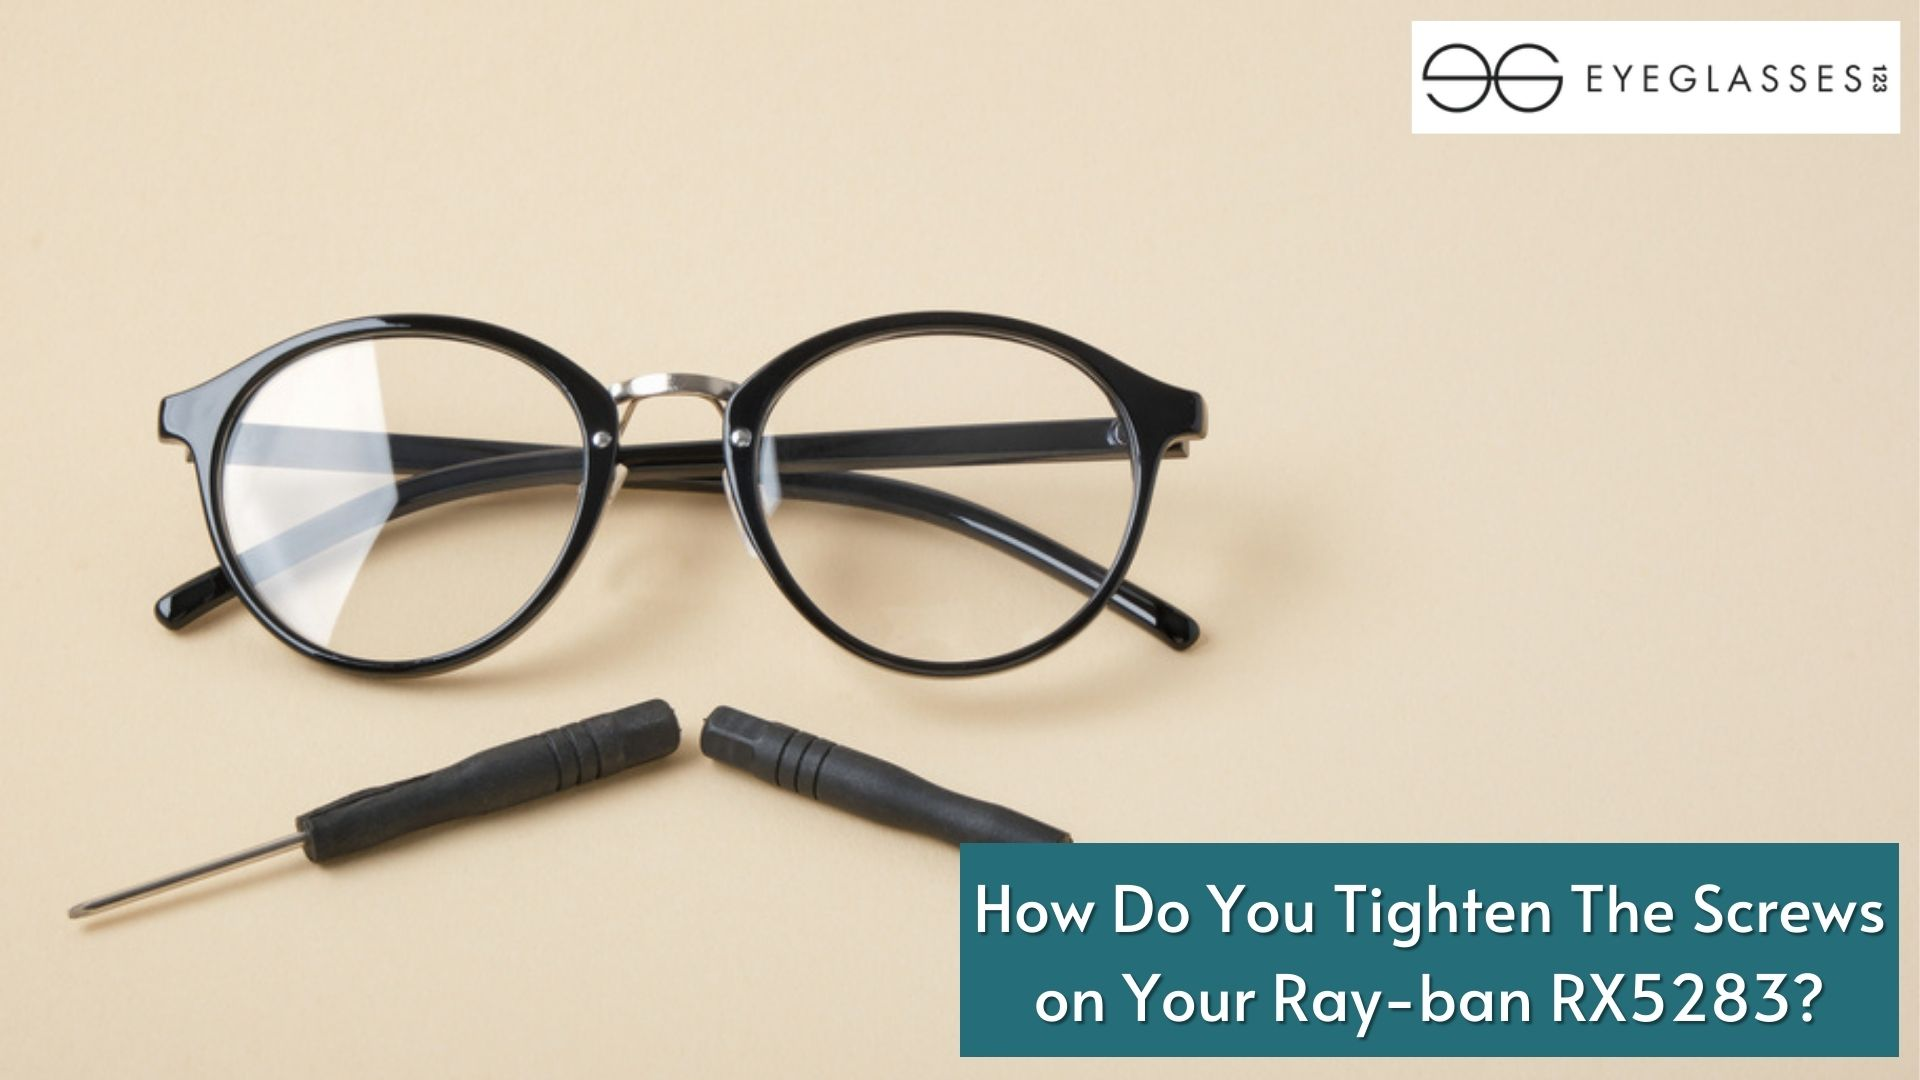 How To Adjust Your RX5283 Ray-Ban Eyeglasses At Home?